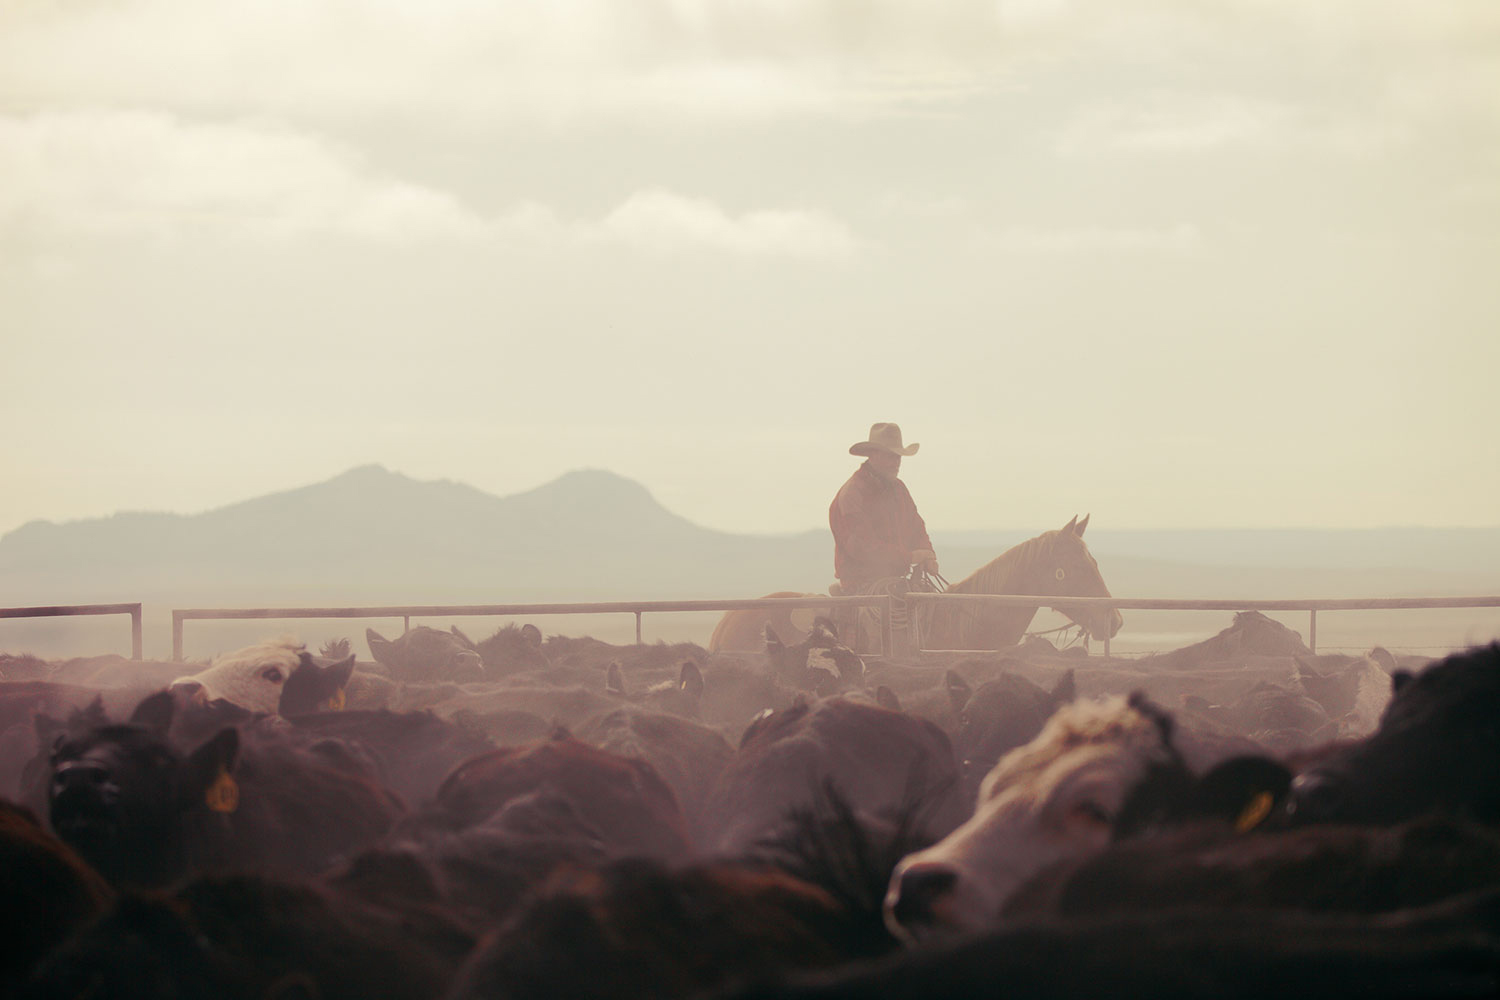 A cowboy rounds up cattle on a ranch near Cleveland, Montana. See more cowboy photos HERE.